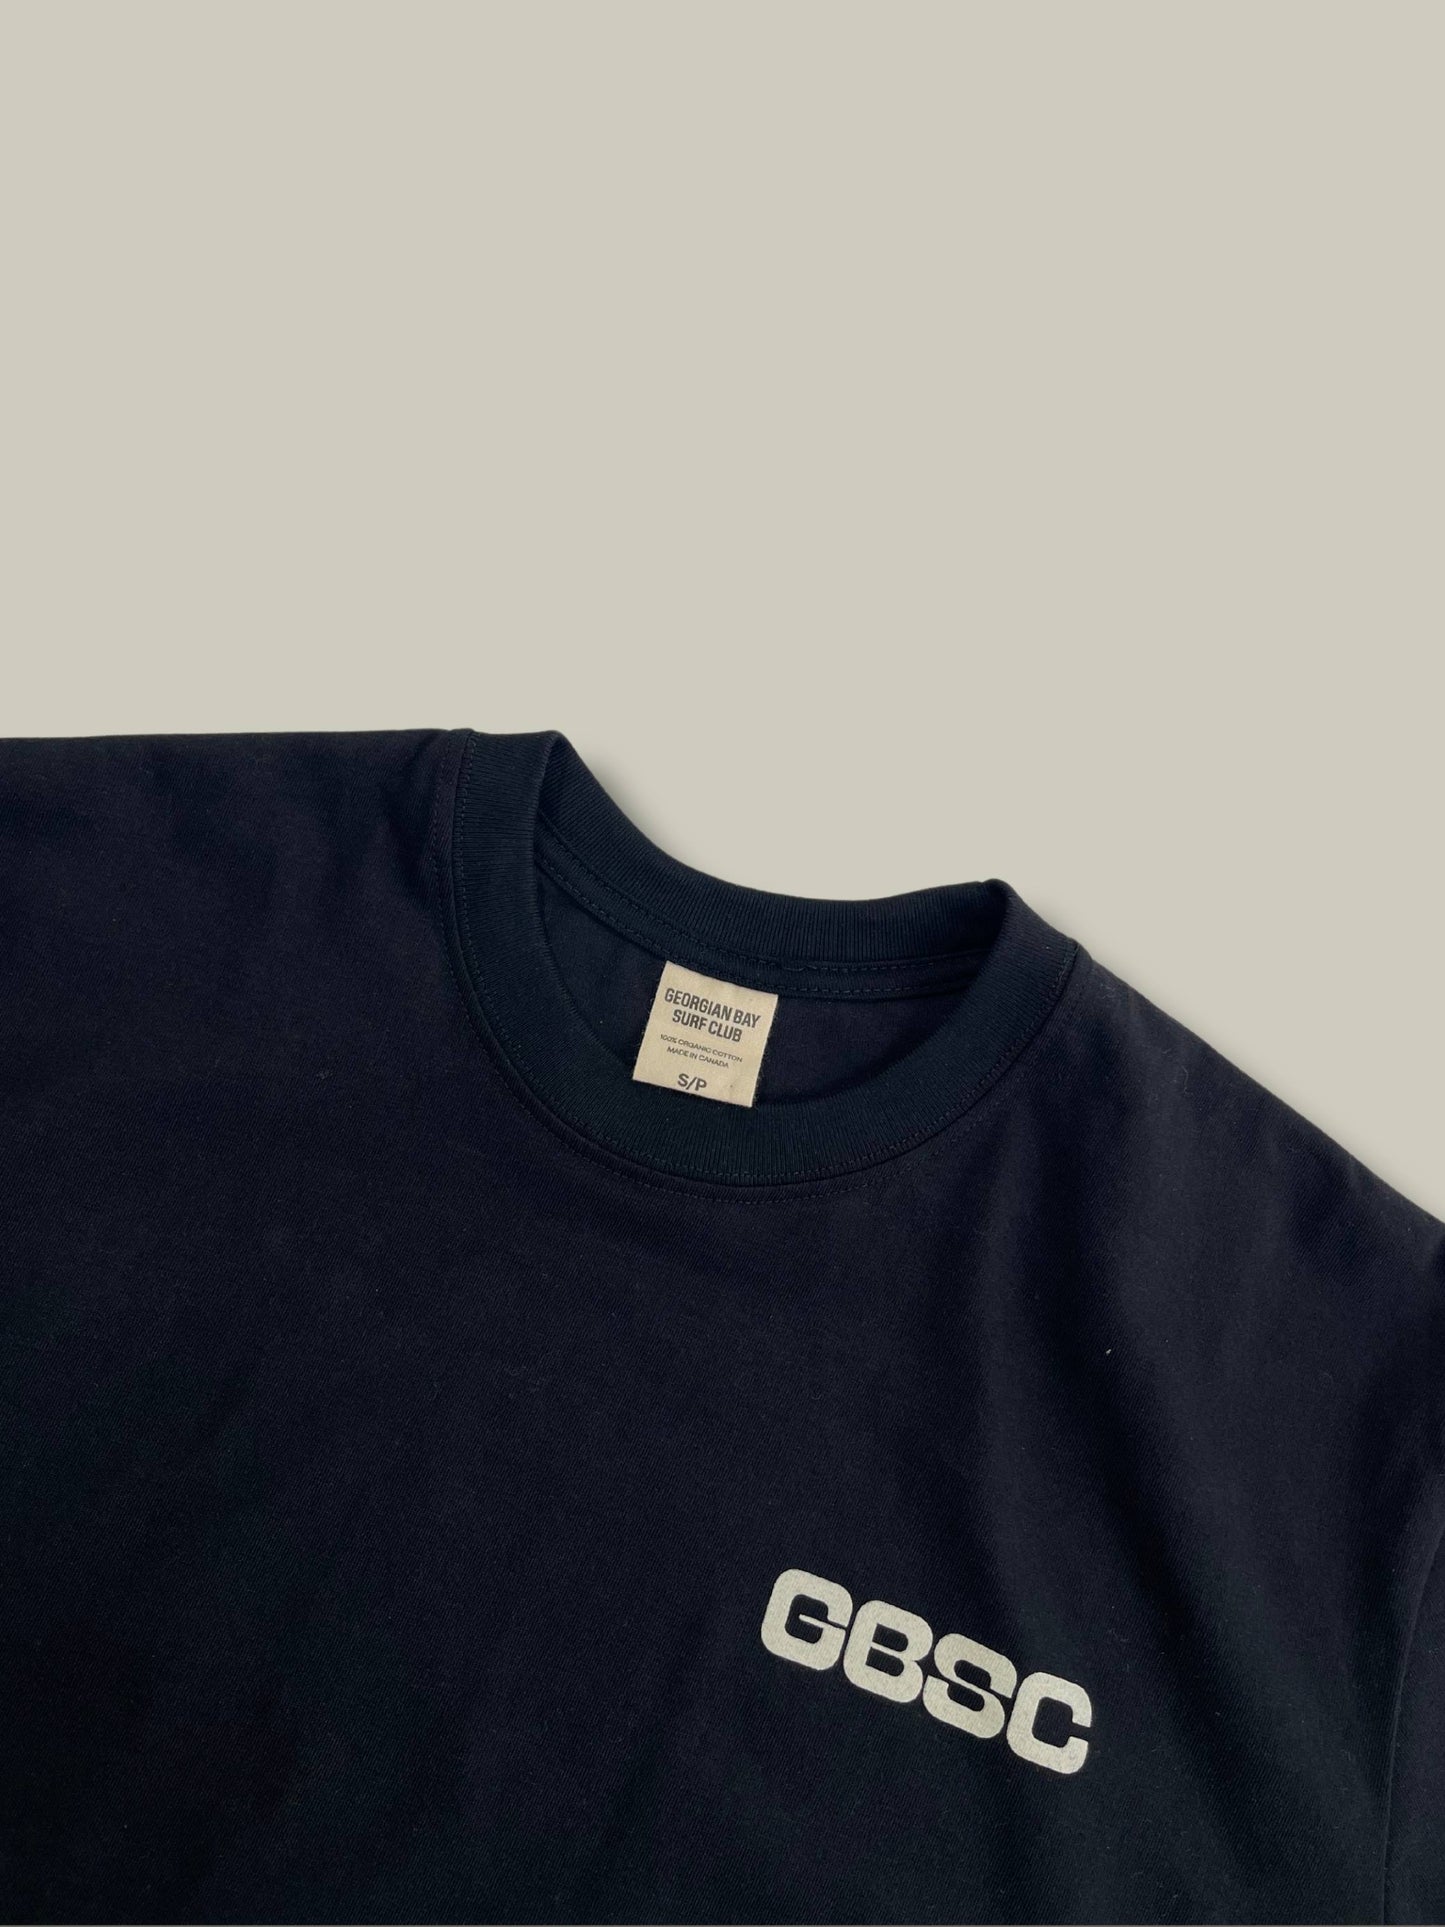 Detailed view of the beige GBSC graphic on front chest of the Black Boomer tee shirt